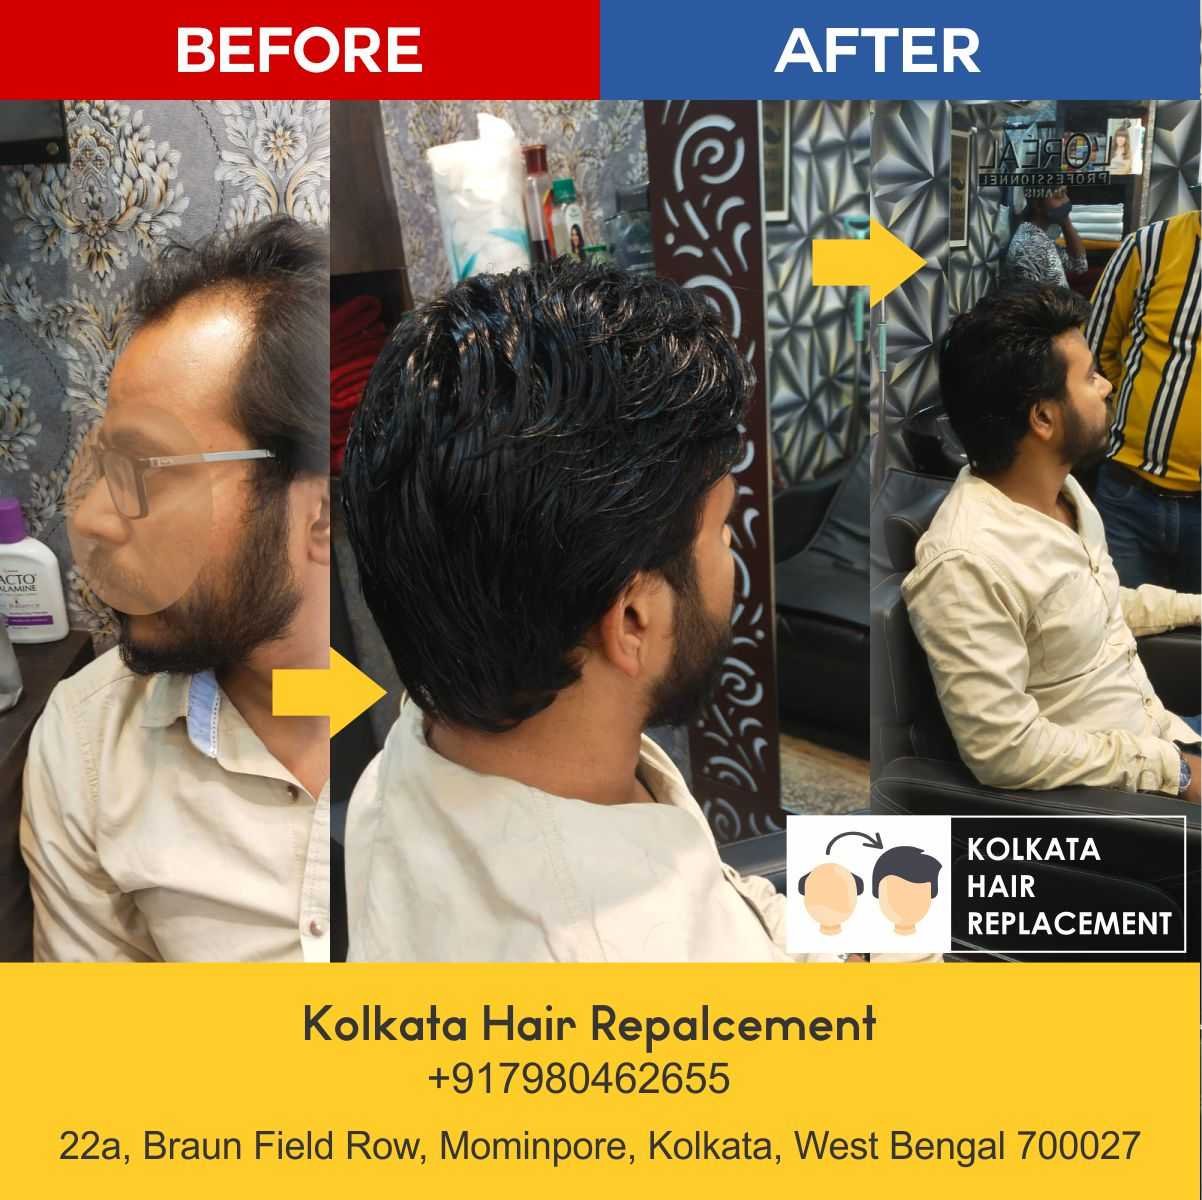 men-hair-wig-patch-kolkata-hair-replacement-before-after-01